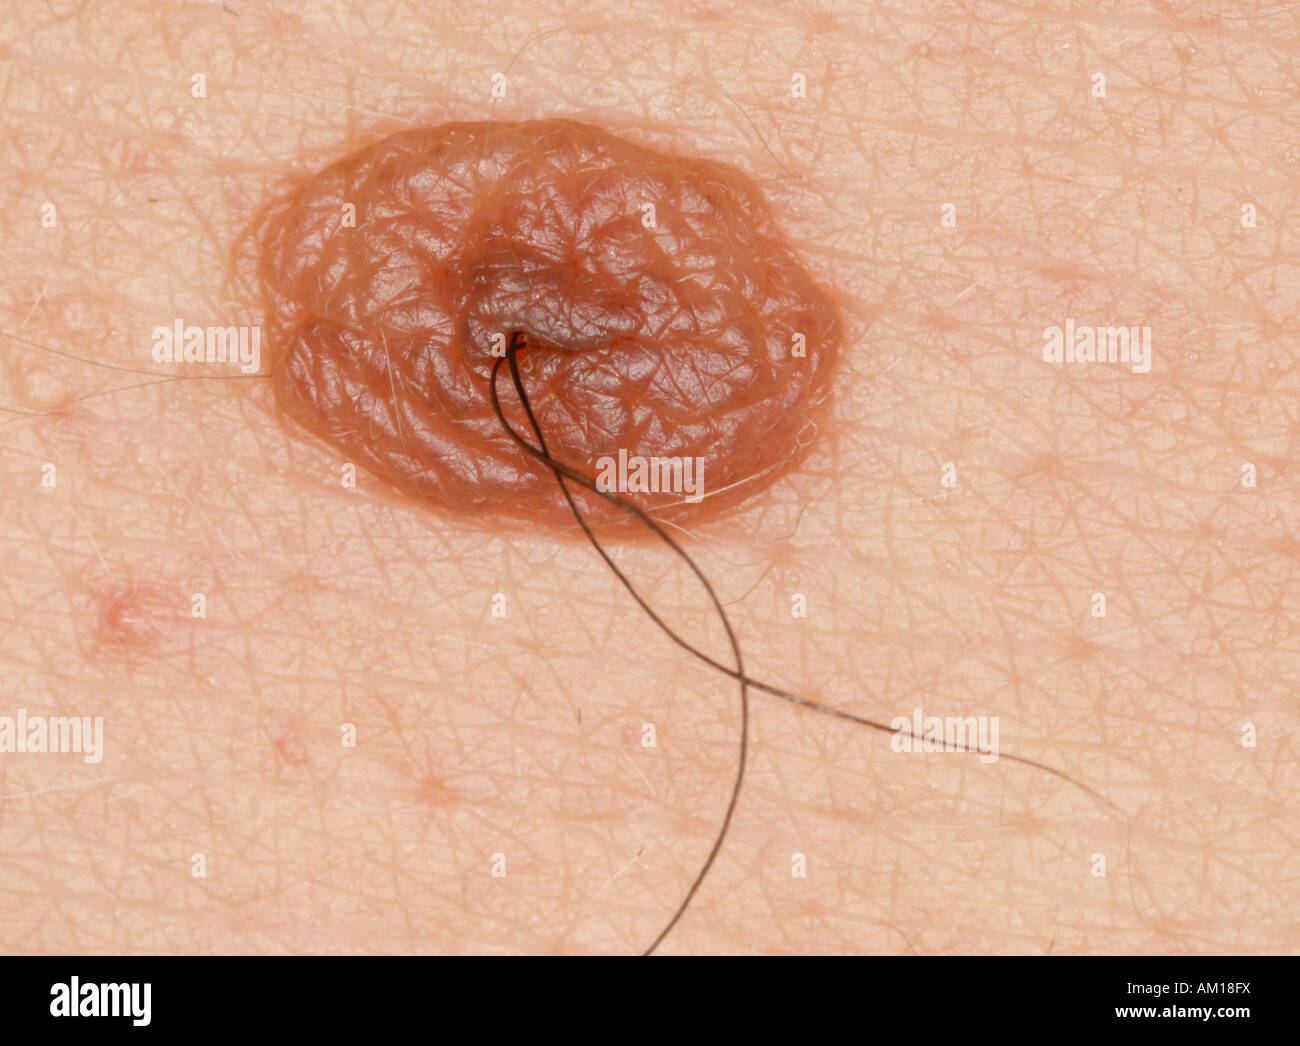 Hair growing on a wart Stock Photo - Alamy